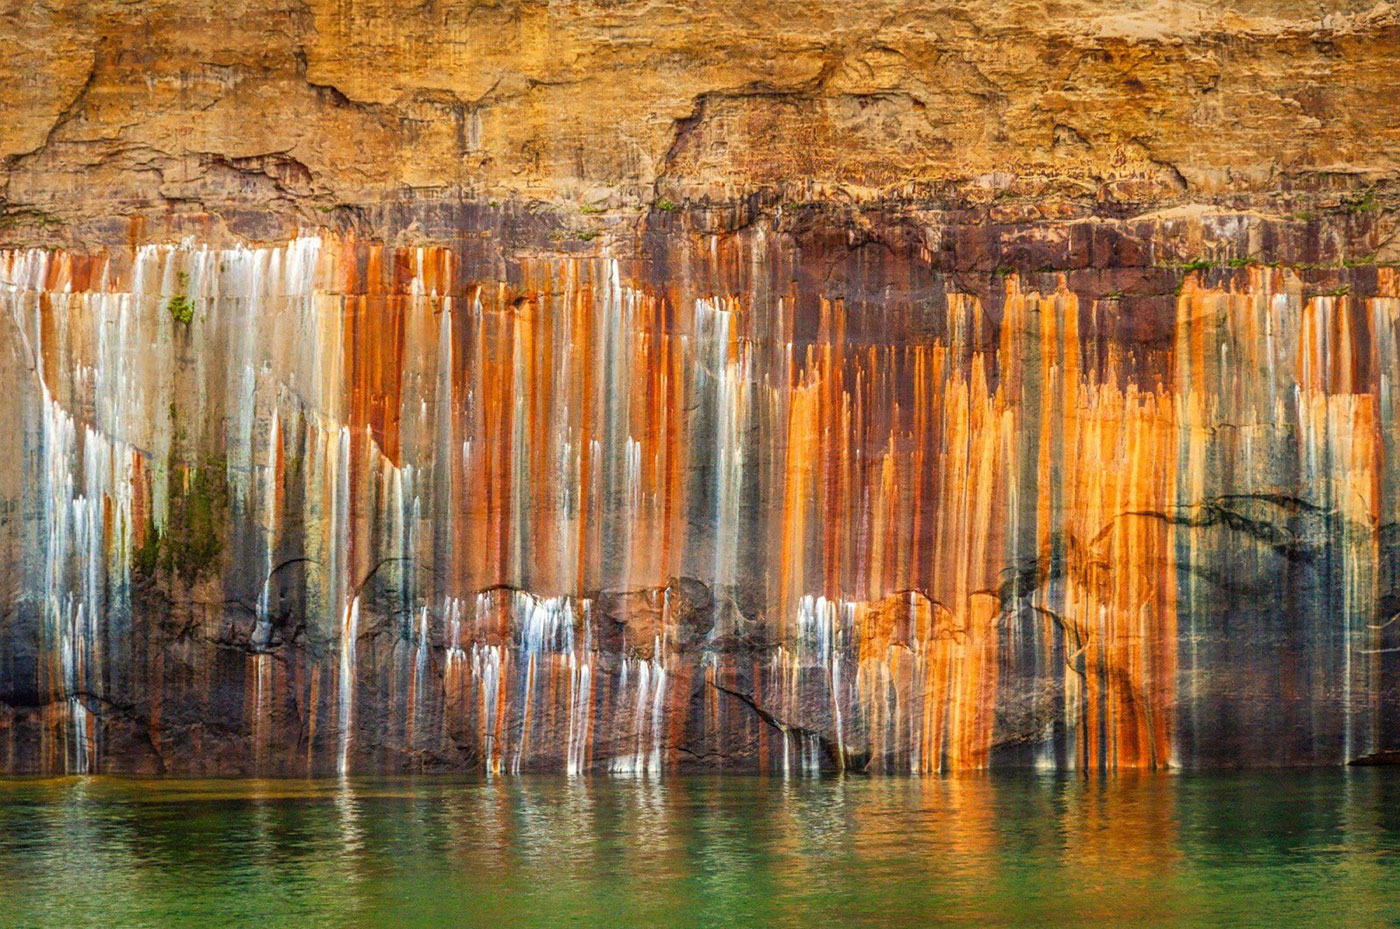 Streaks of mineral-stain color the cliffs of the Pictured Rocks